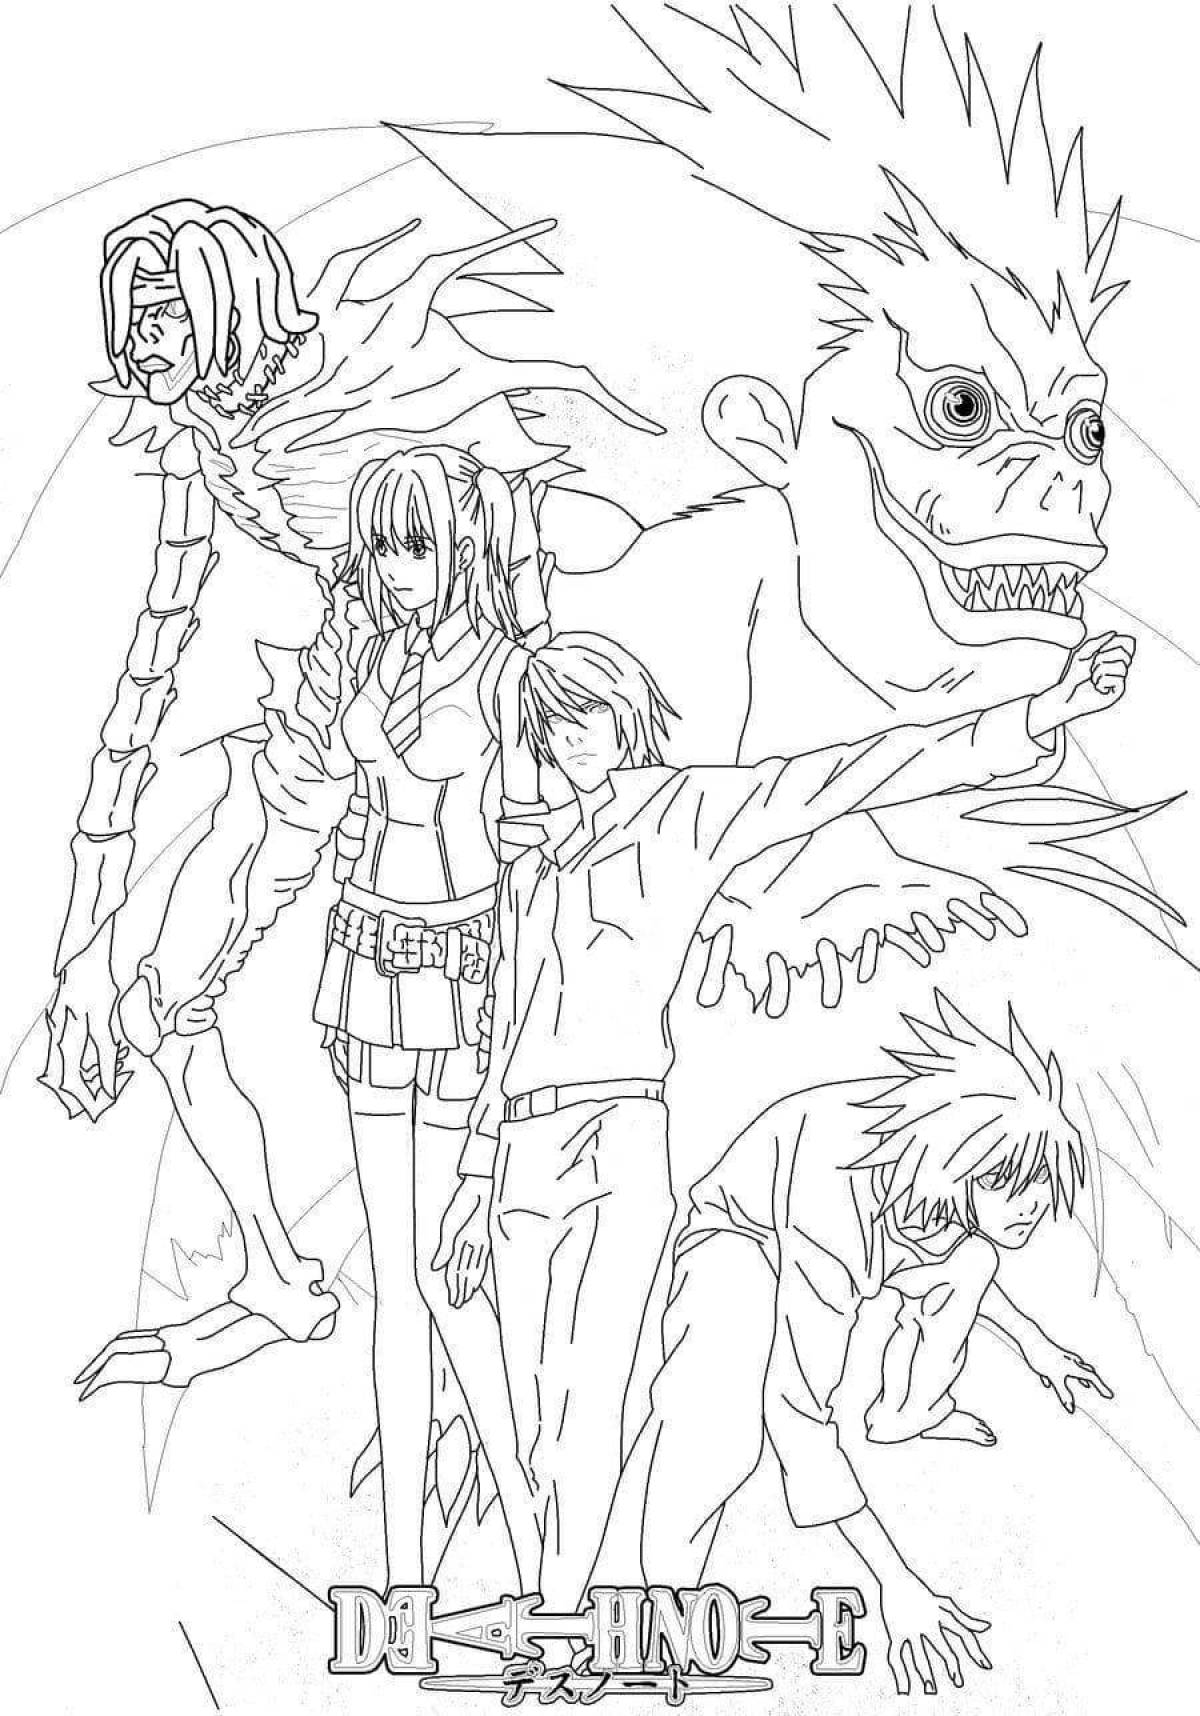 Great death note coloring page